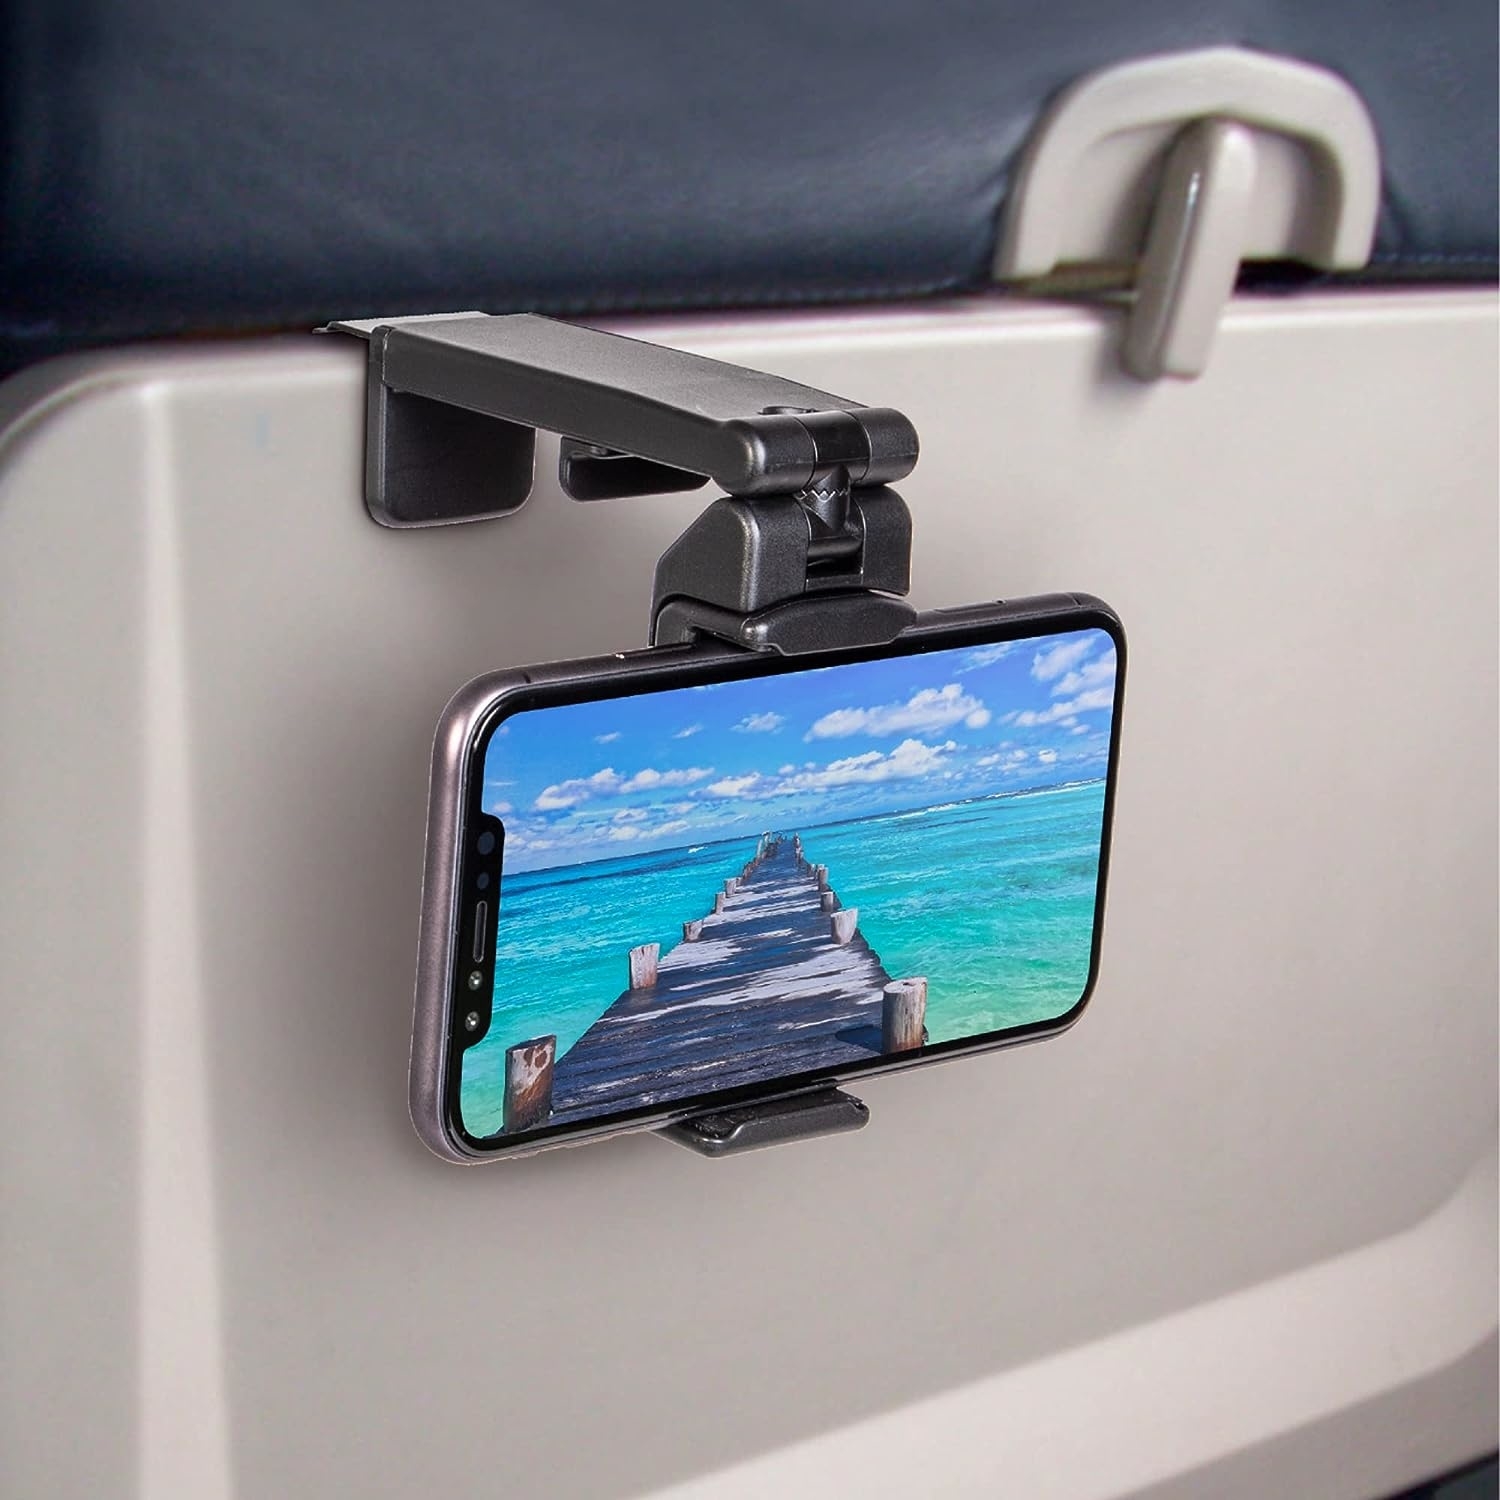 A phone mounted to the back of an airplane tray table